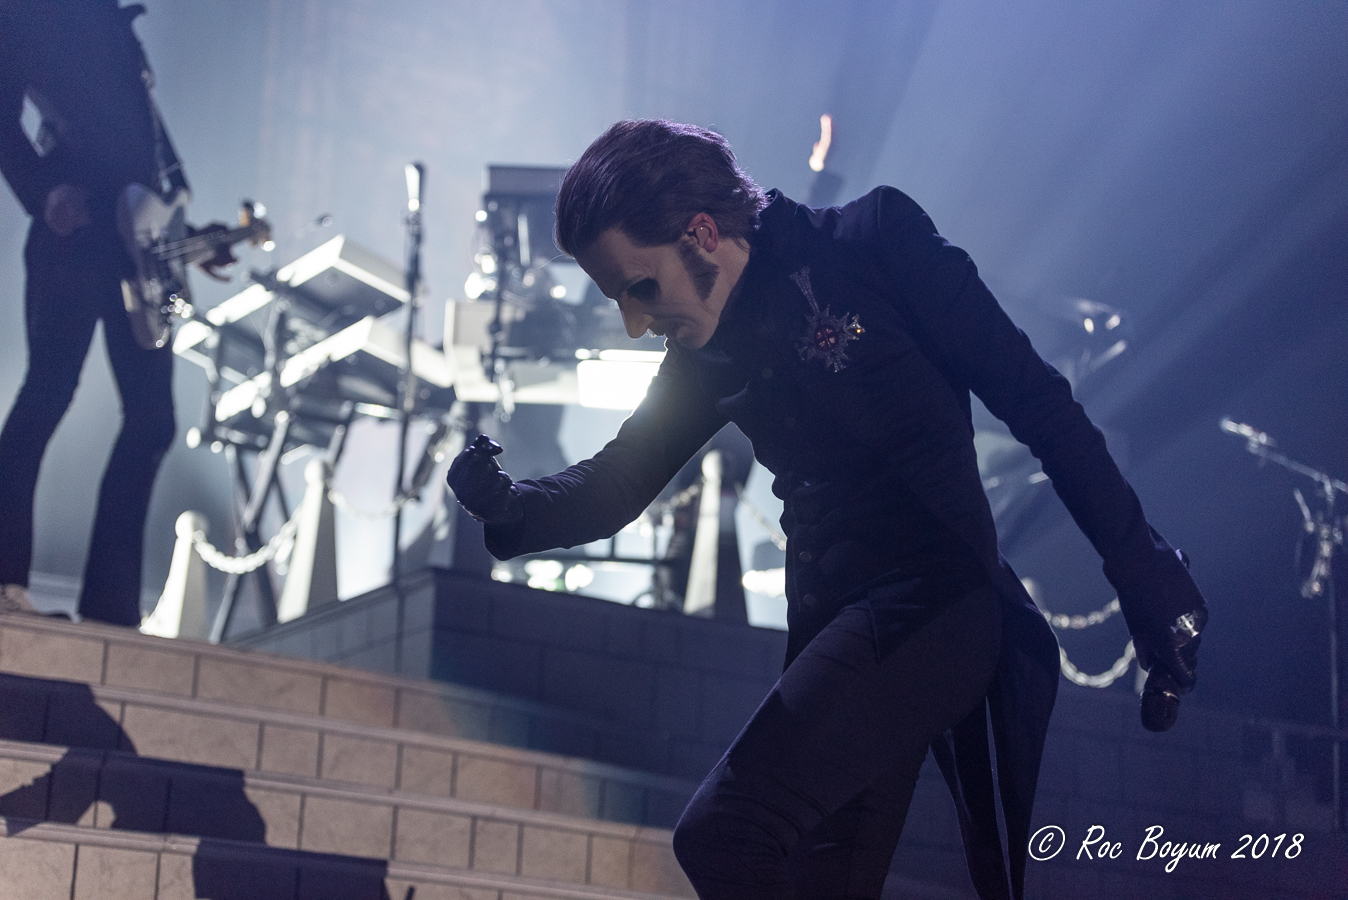 Ghost band Los Angeles Forum Concert Photography Concert Reviews